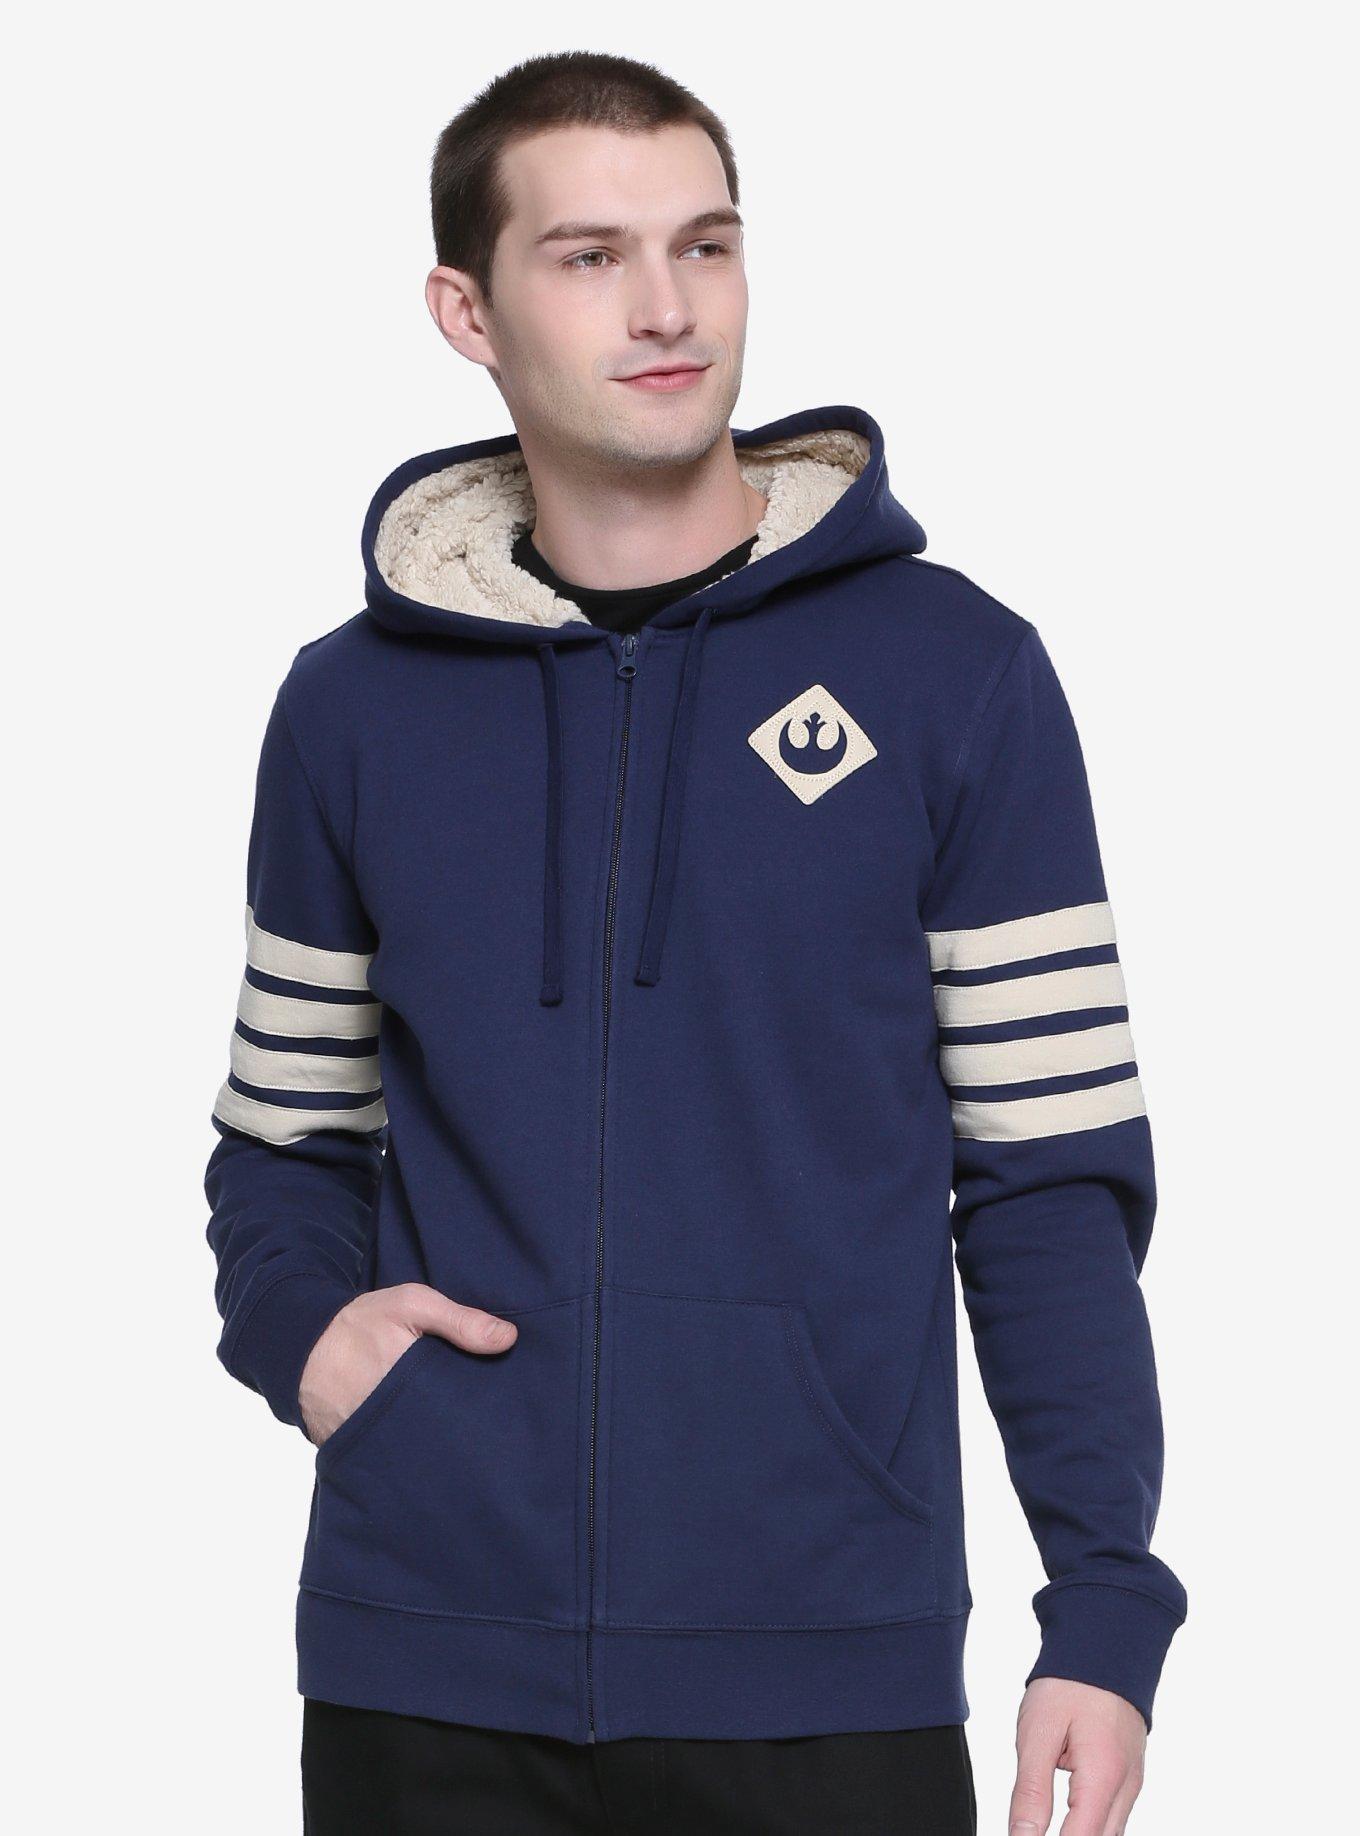 Star Wars Patch Hoodie - BoxLunch Exclusive, NAVY, hi-res